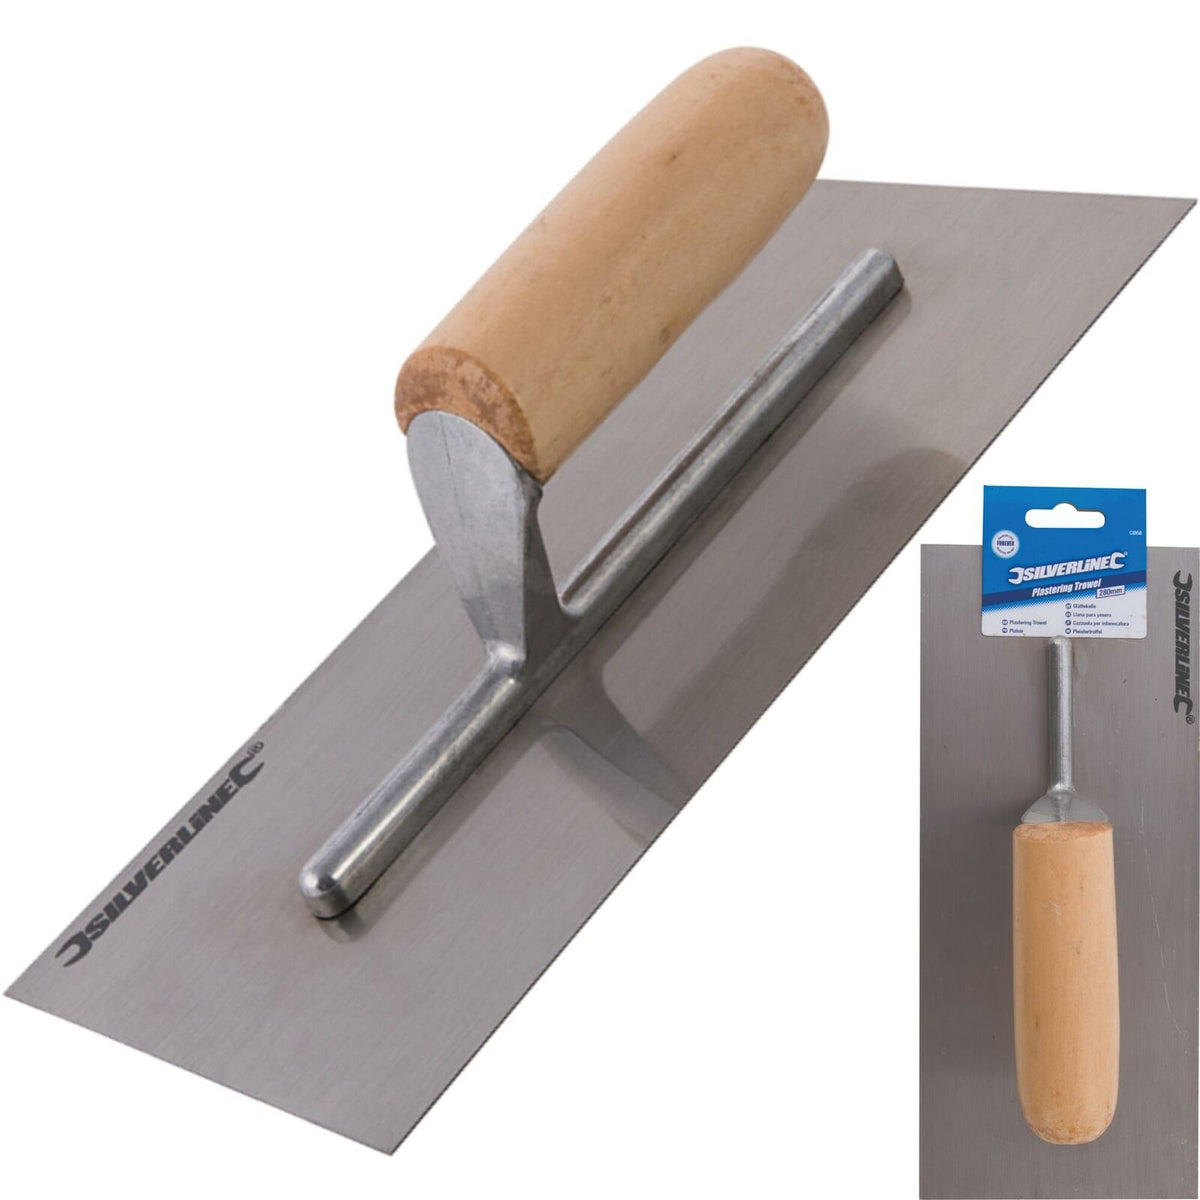 Silverline Wooden Handle Smoothing Levelling Finishing Plastering Trowel 11"